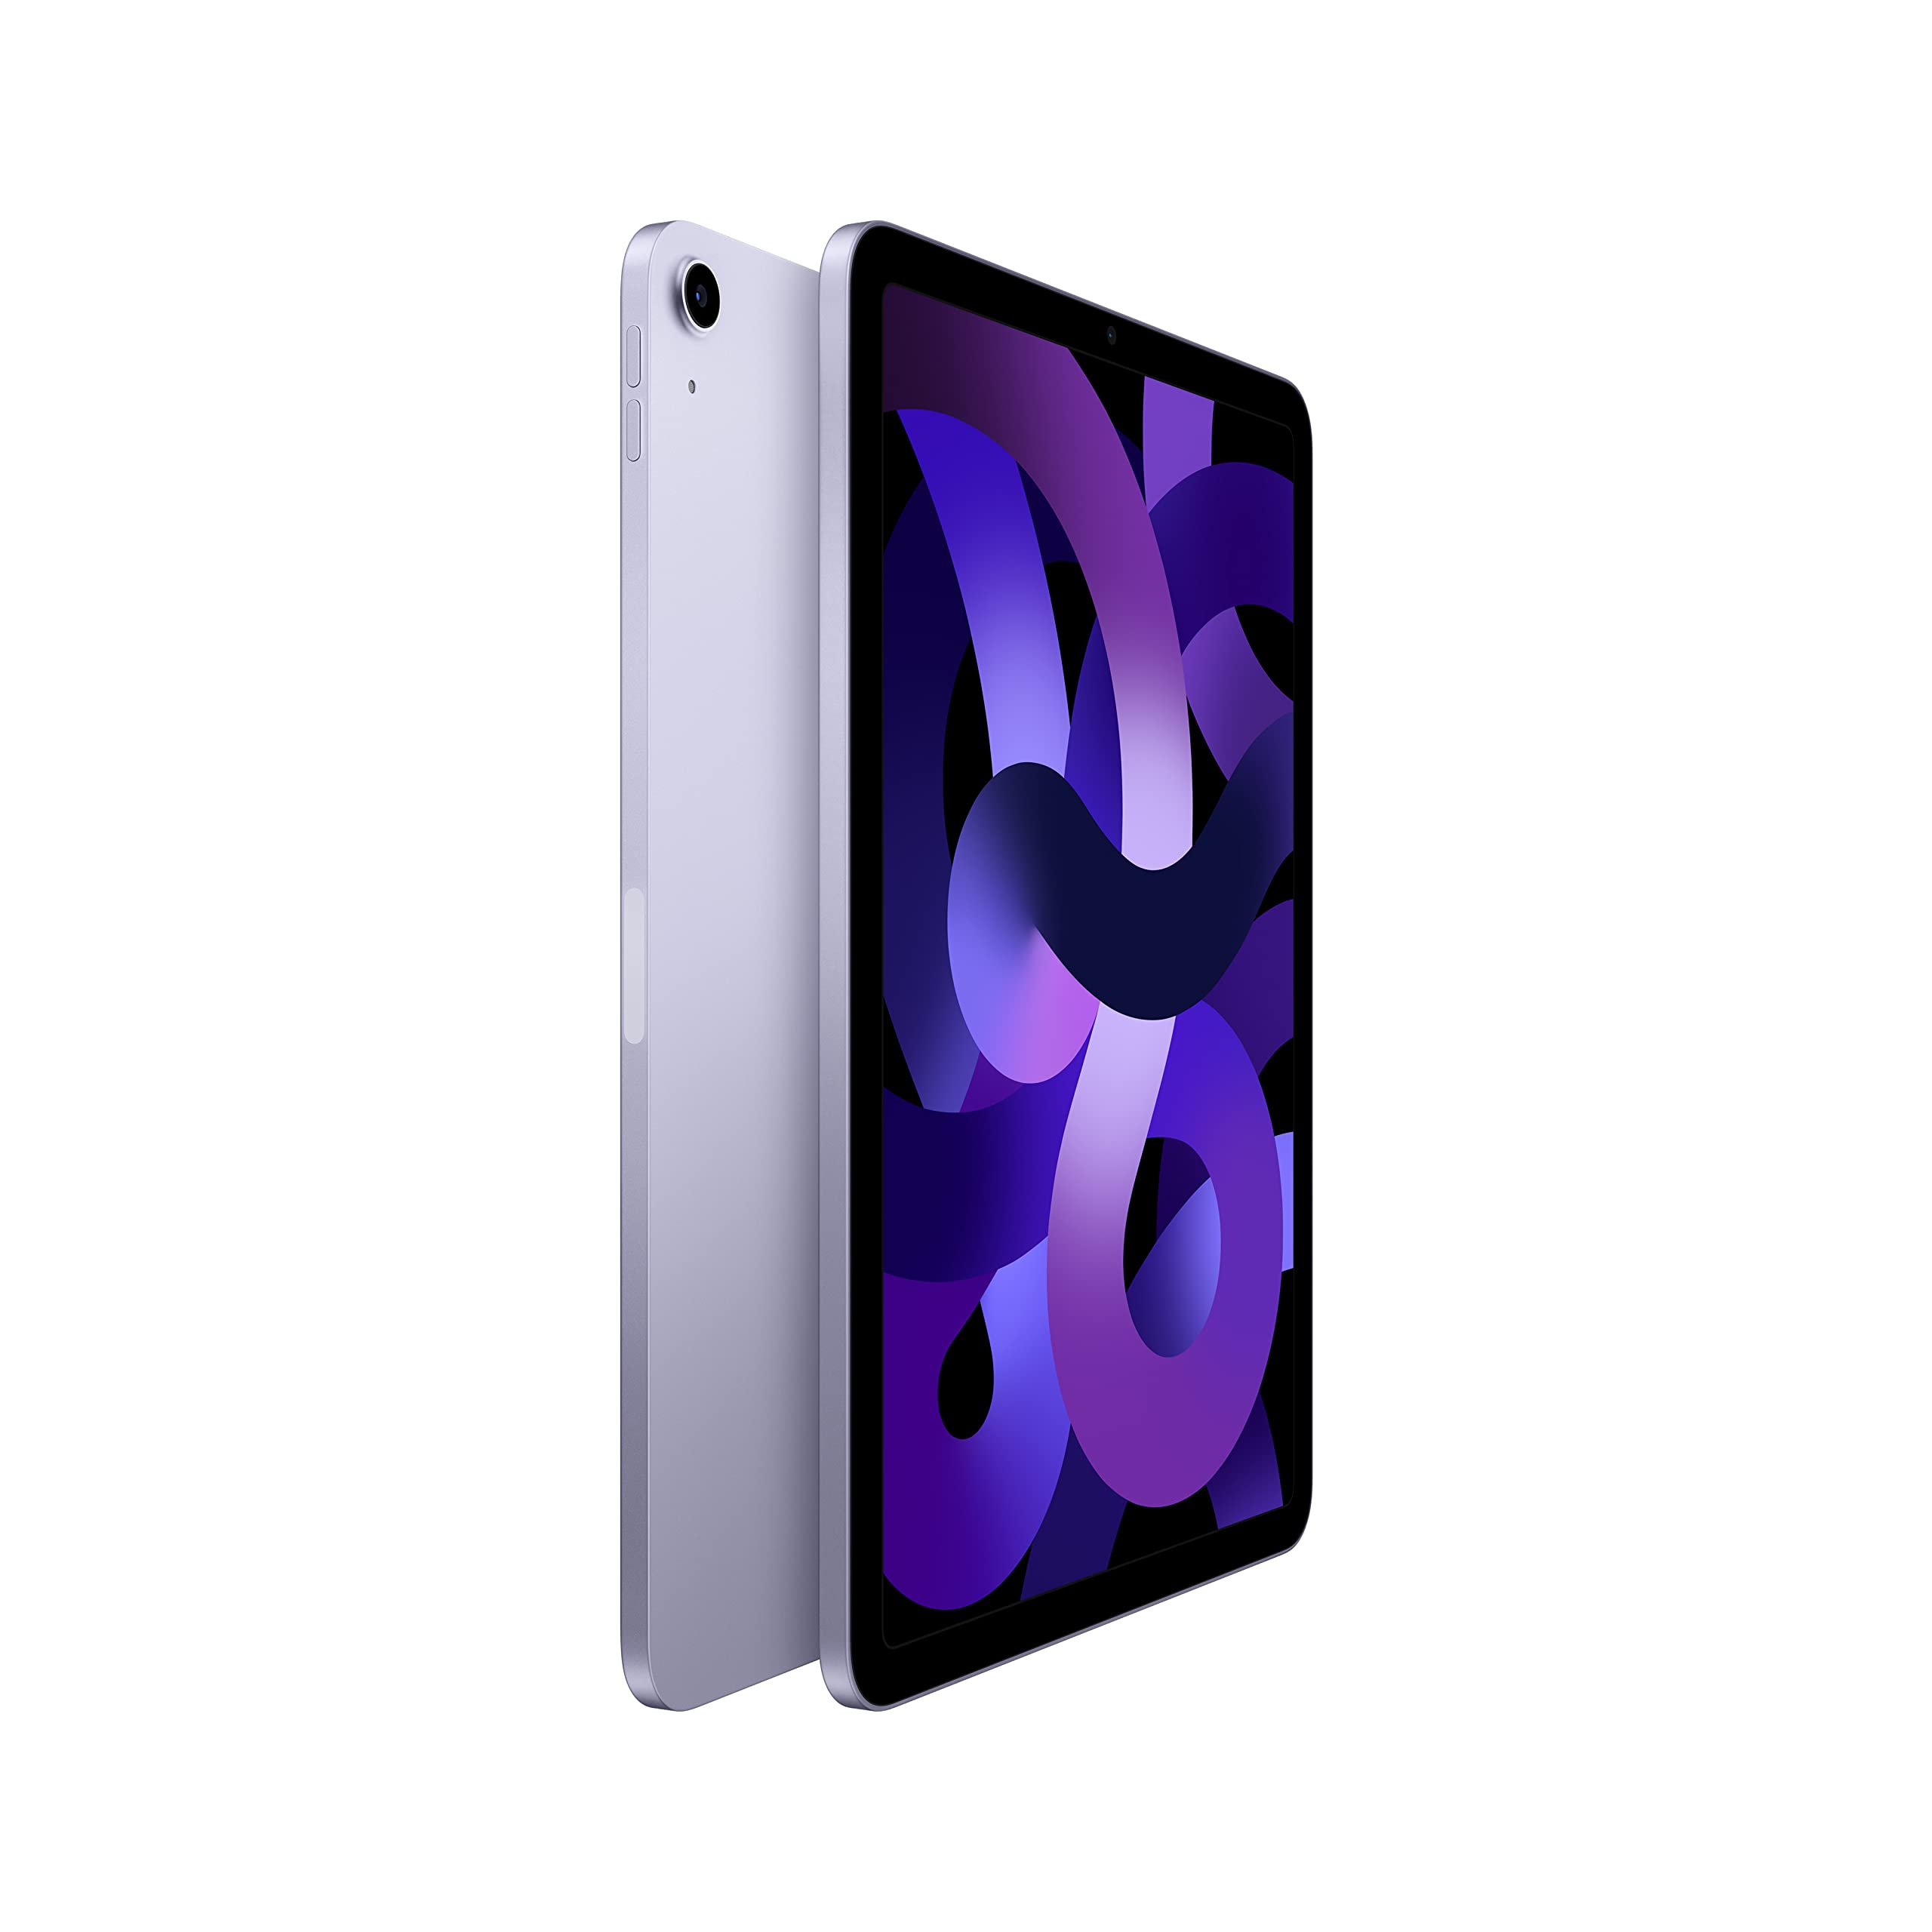 Apple iPad Air (5th Generation): with M1 chip, 10.9-inch Liquid Retina Display, 256GB, Wi-Fi 6, 12MP front/12MP Back Camera, Touch ID, All-Day Battery Life – Purple